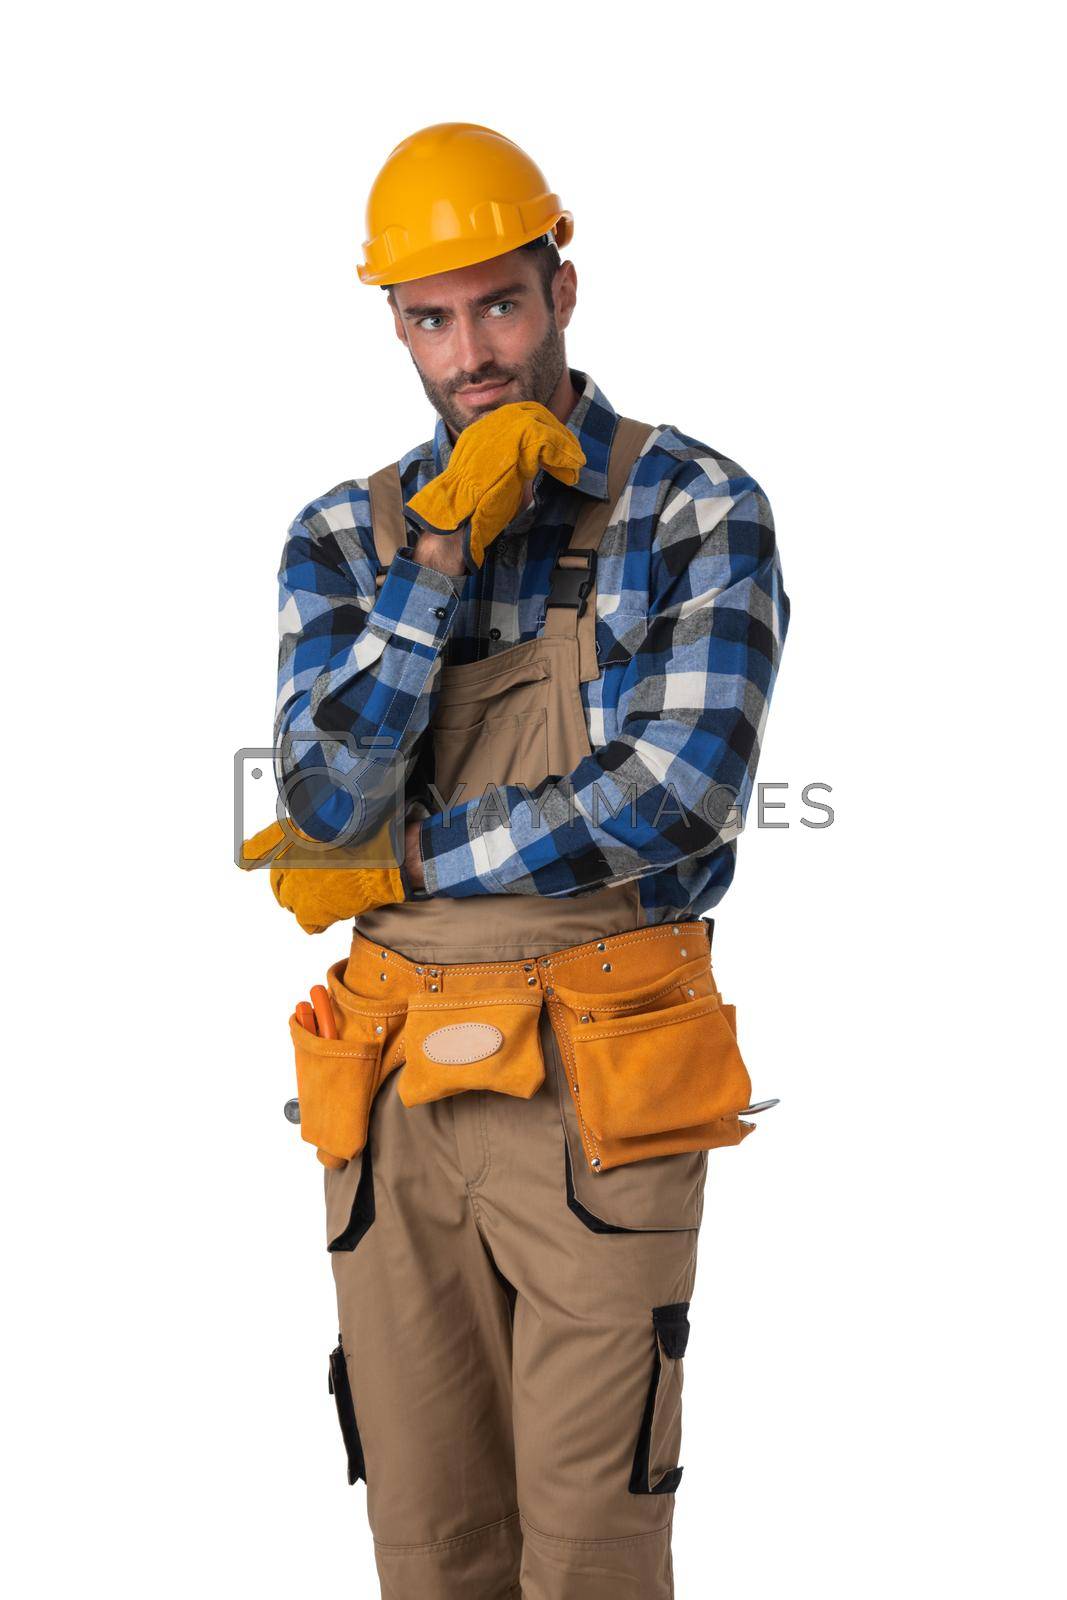 Royalty free image of Construction worker thinking by ALotOfPeople